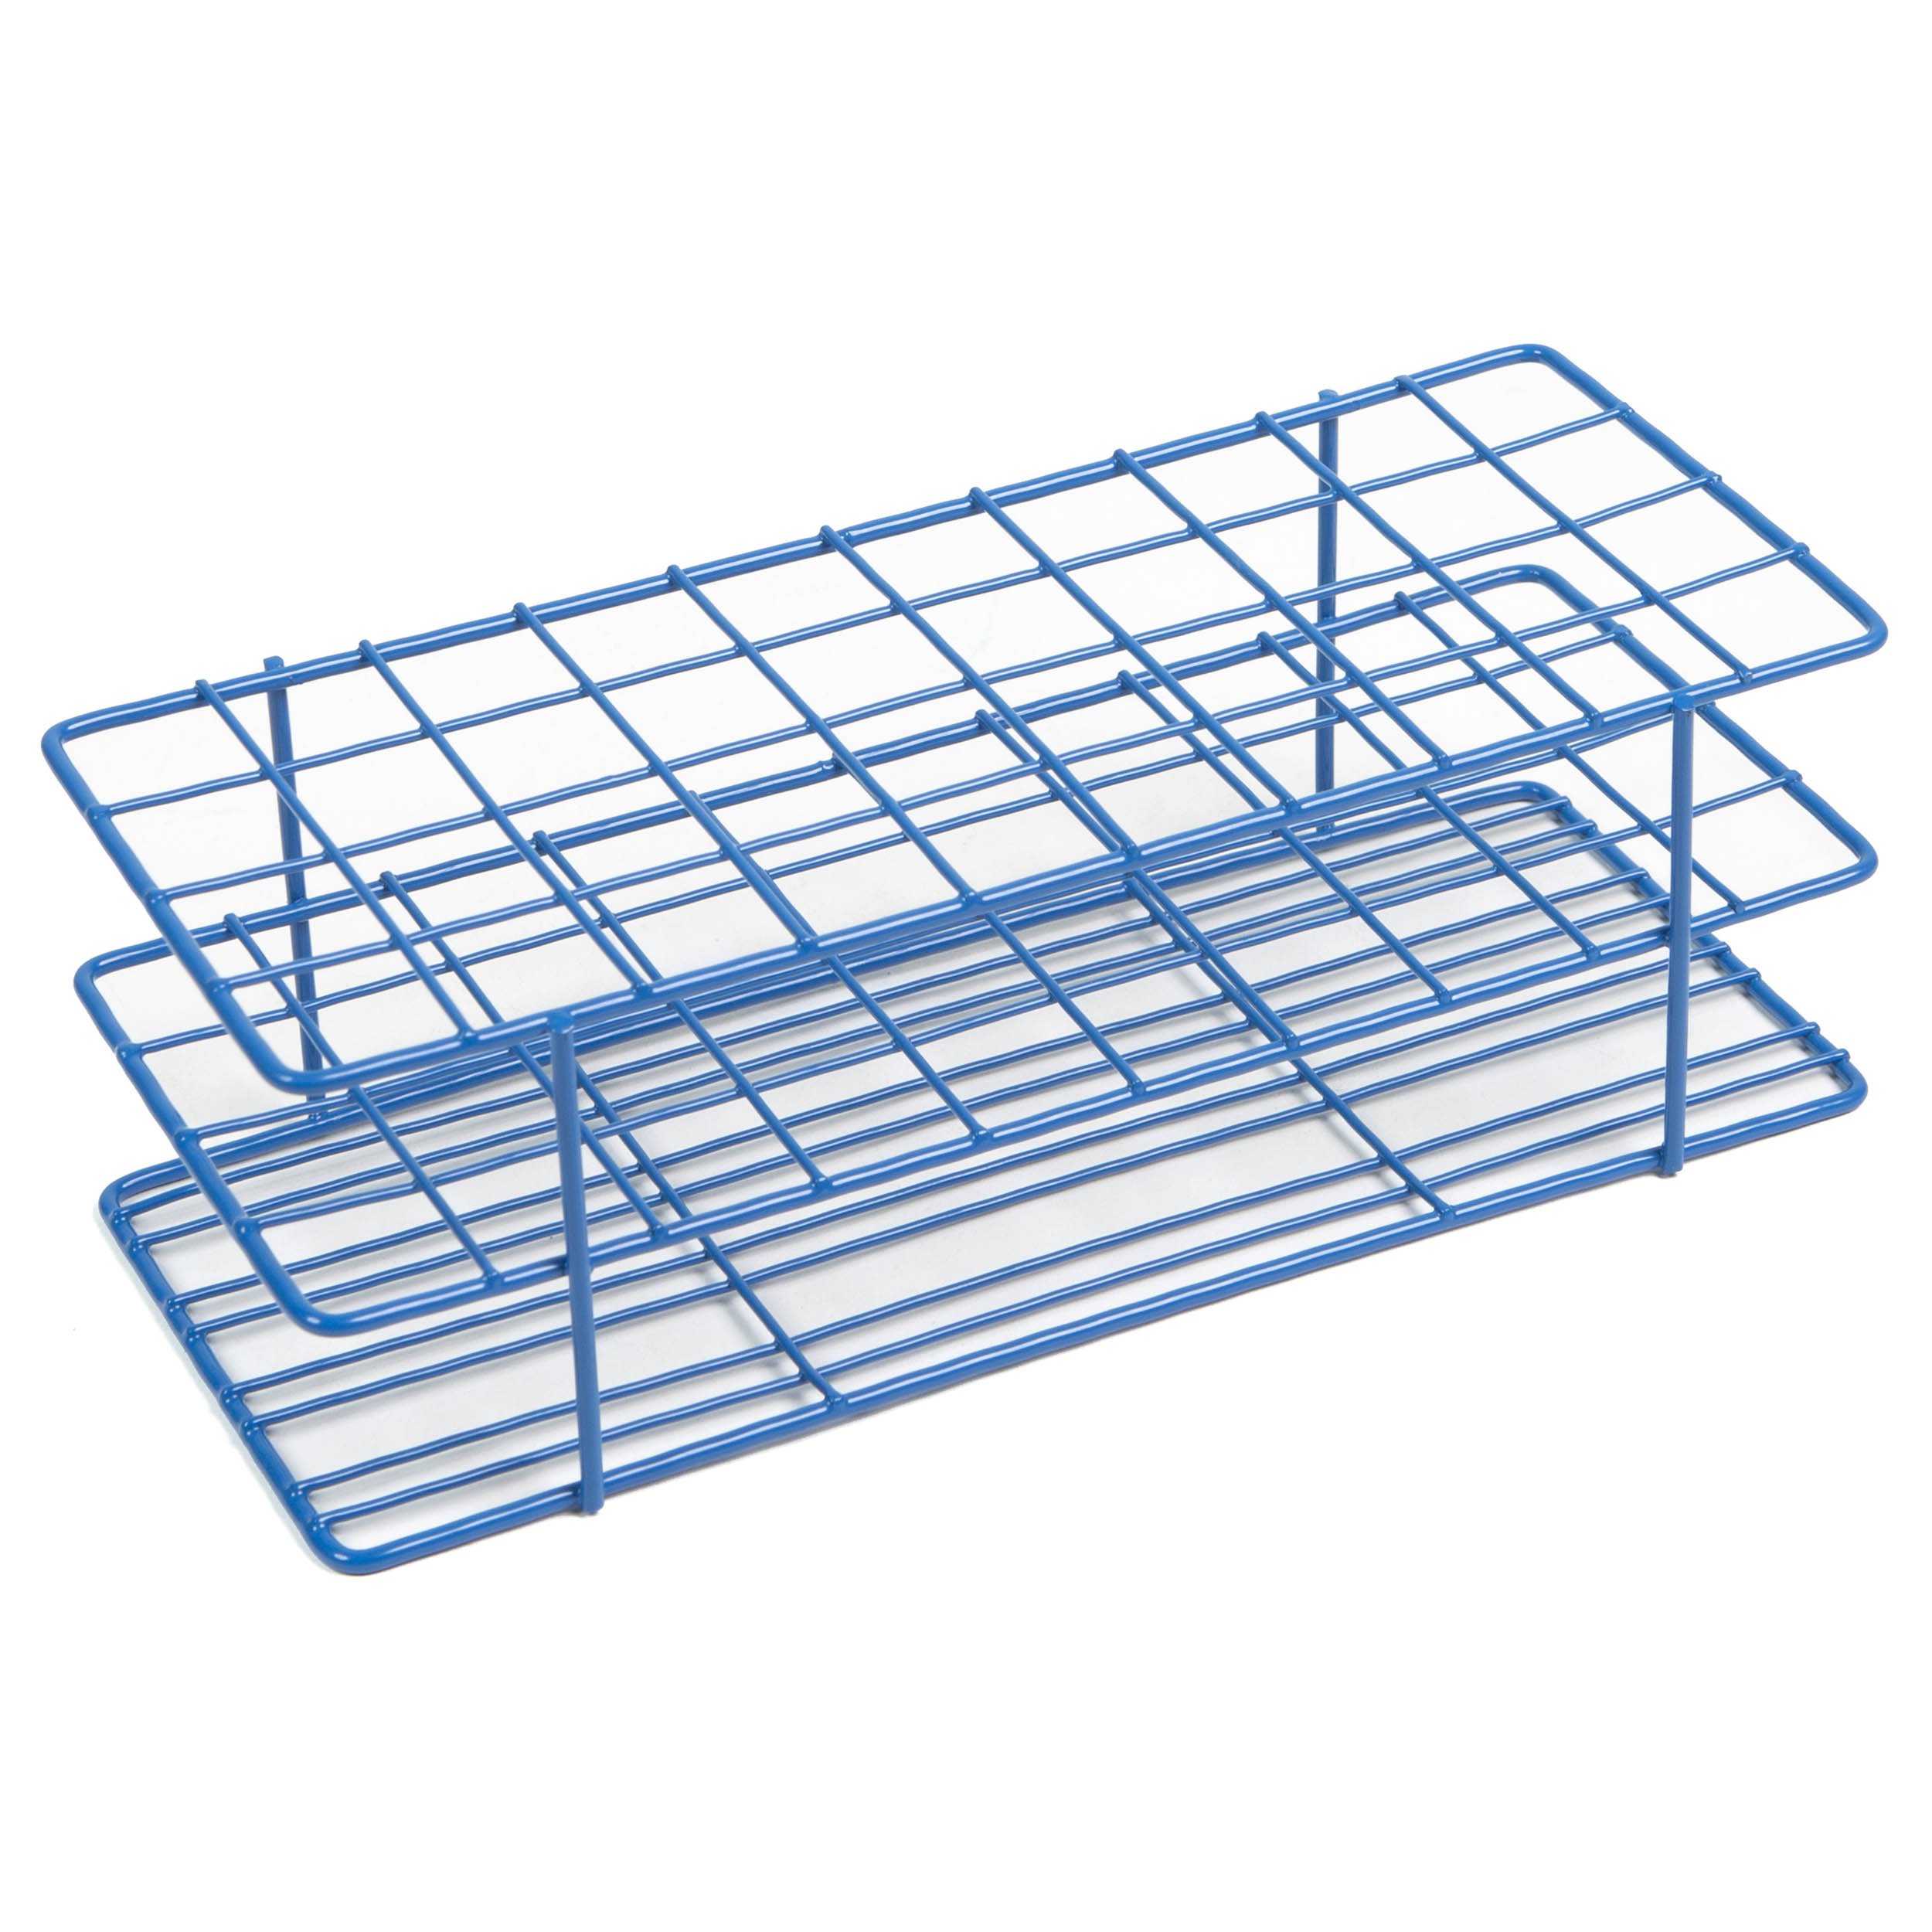 Coated Wire Rack - Fits 16-20mm Tubes, 40-Well, Blue